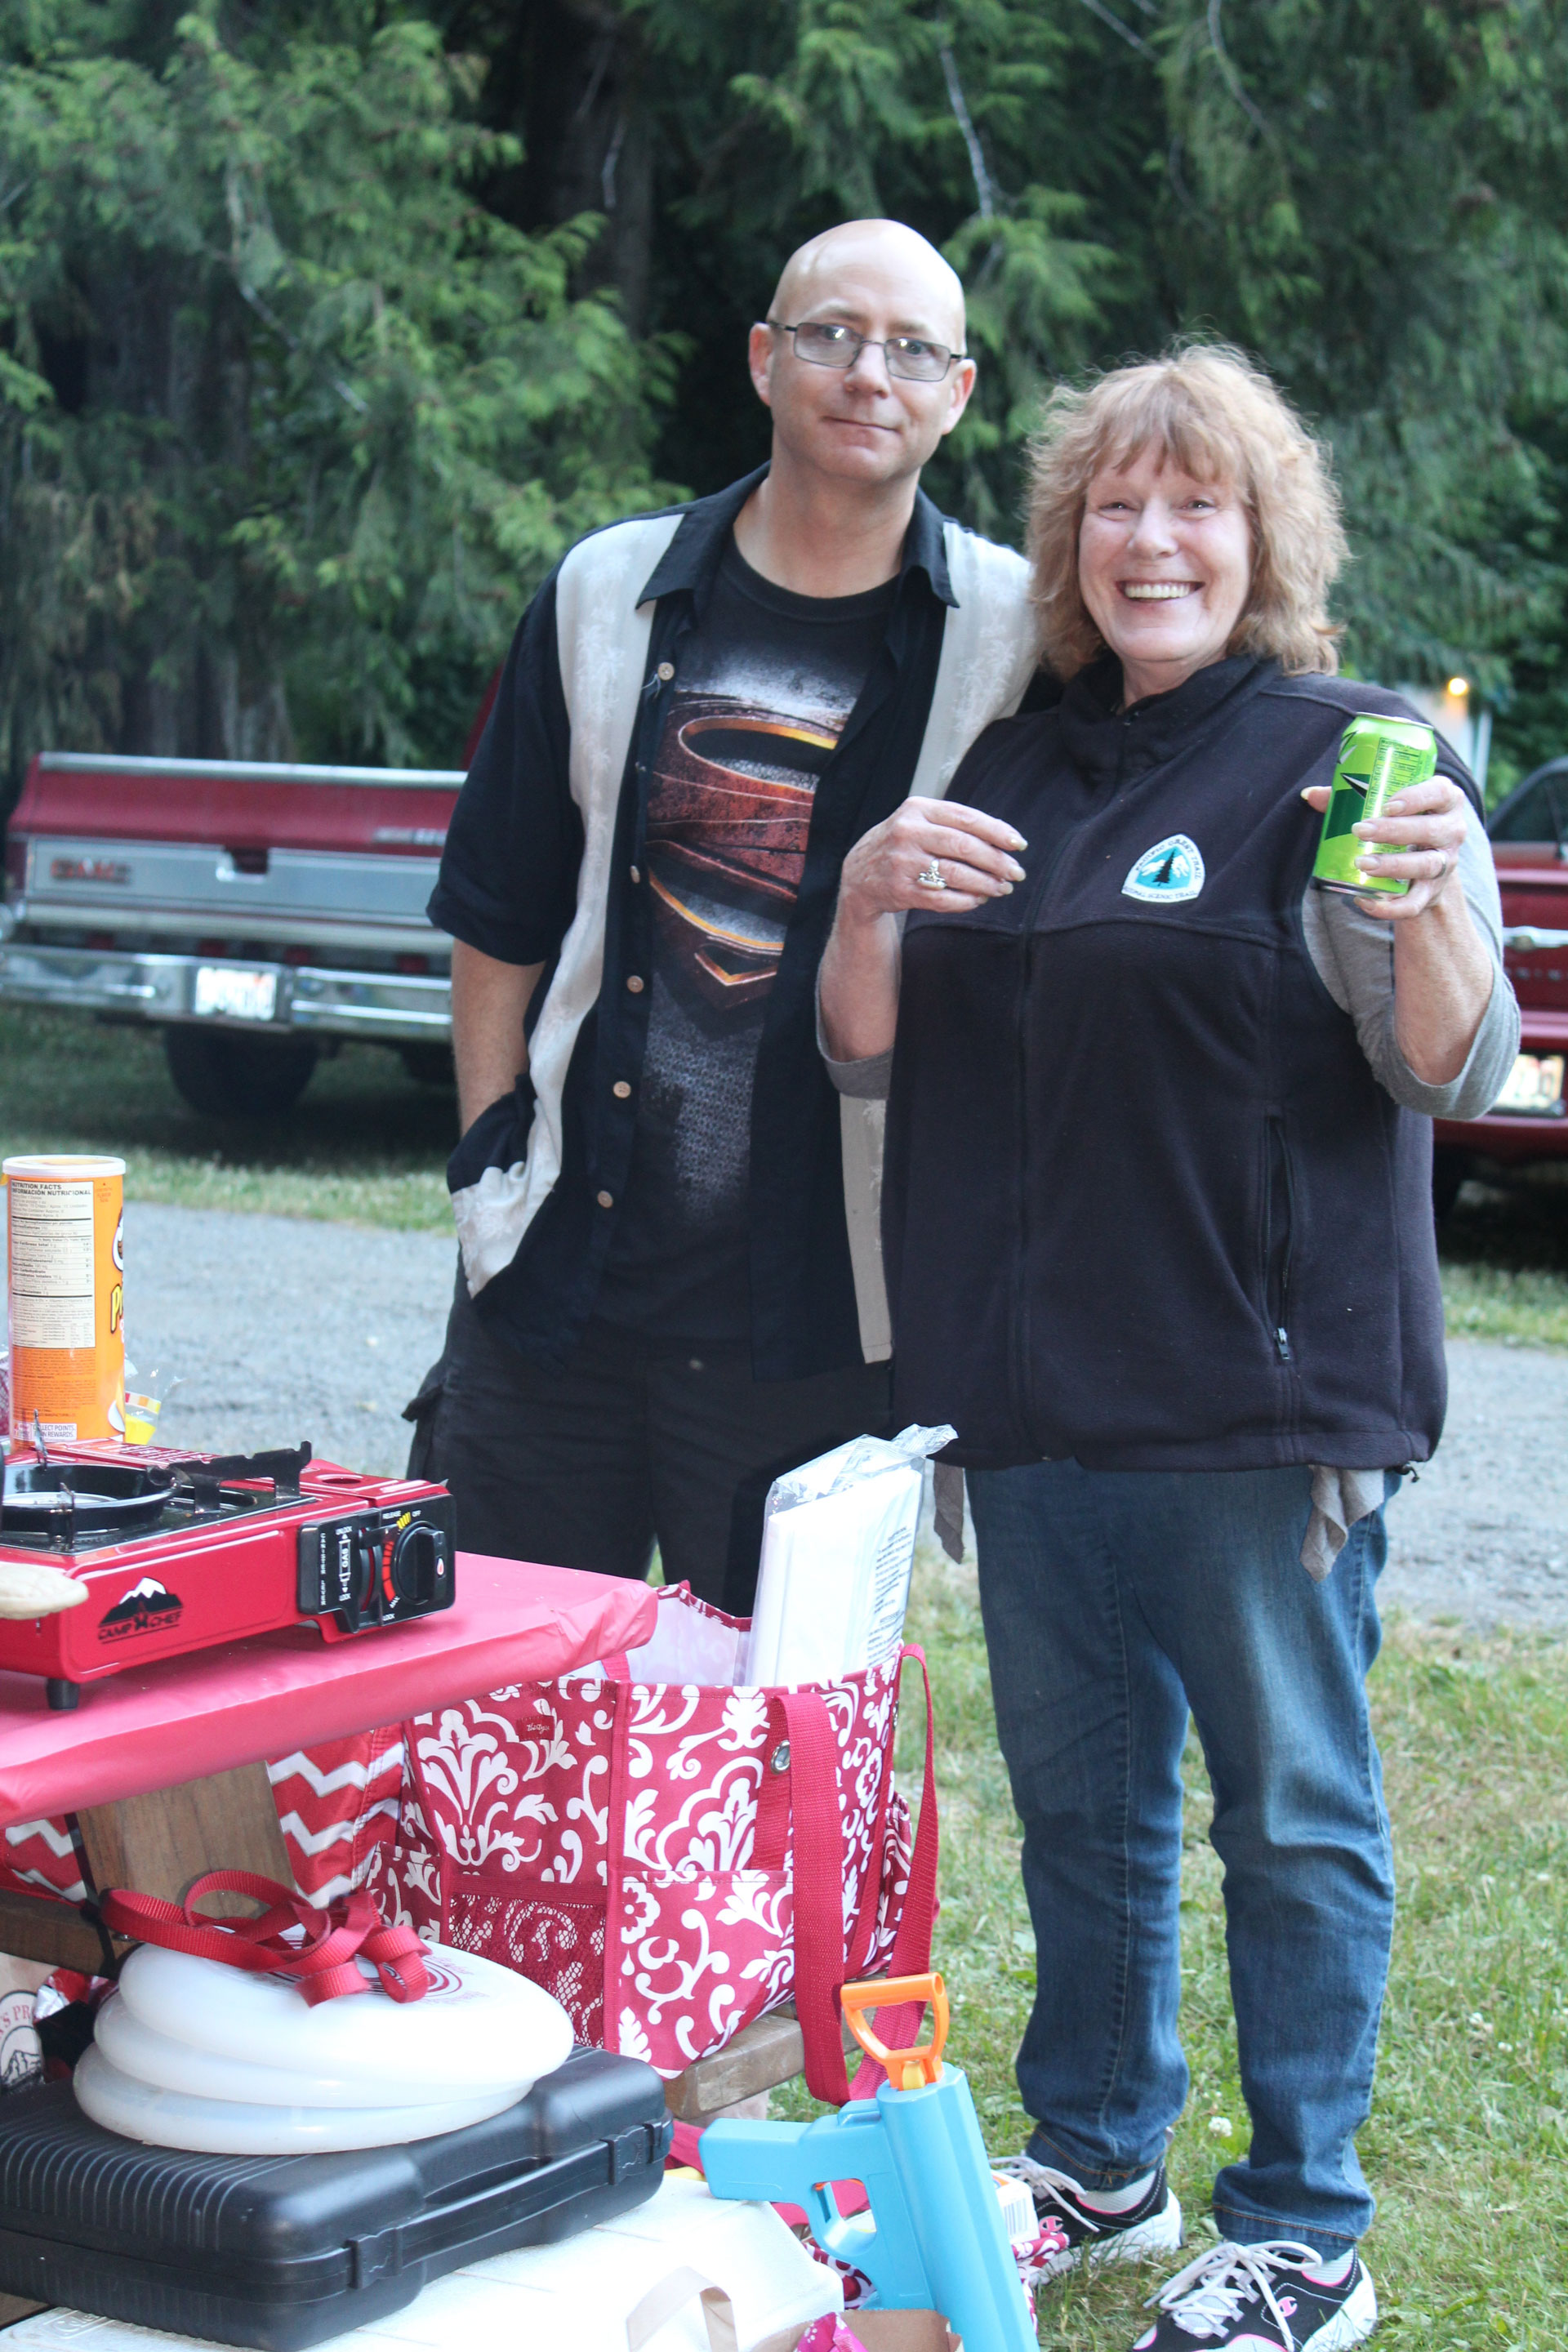 She loved her PCT vest and wore it almost everyday. Here she is with her mountaineering son-in-law Bradley Altman.